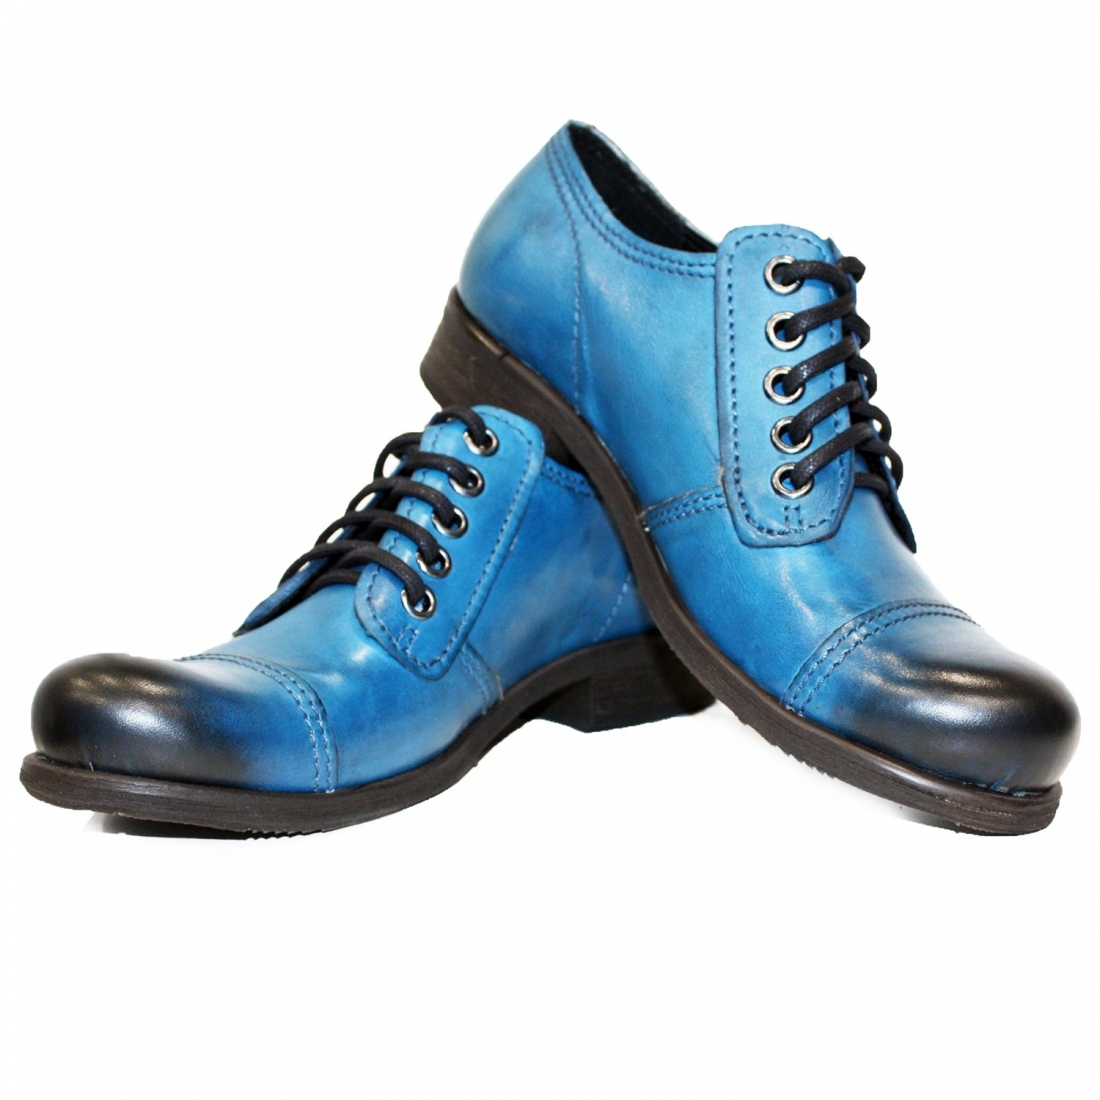 Modello Guetello - Other Boots - Handmade Colorful Italian Leather Shoes